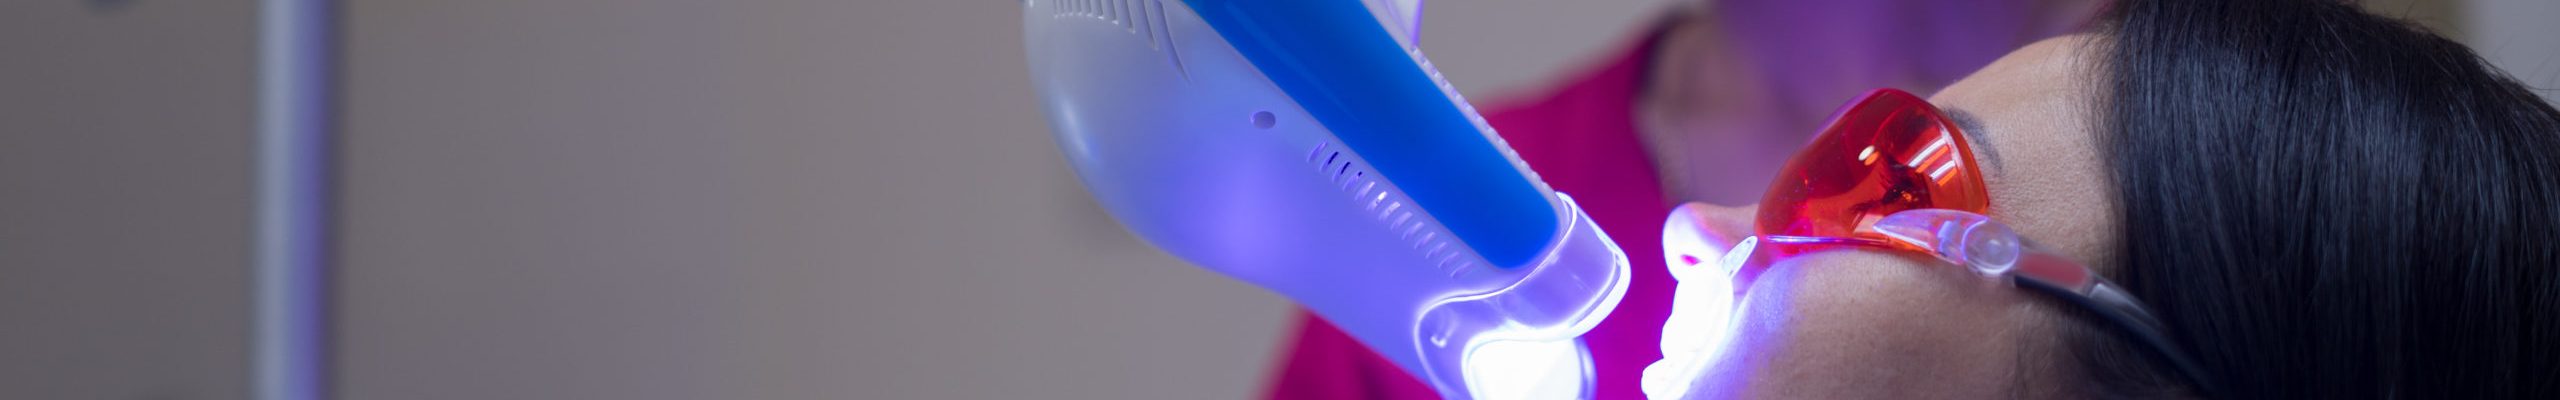 Teeth whitening is an easy way to improve the look of your smile. Here’s everything you need to know about the effectiveness of teeth whitening gel and how it compares with professional teeth whitening.